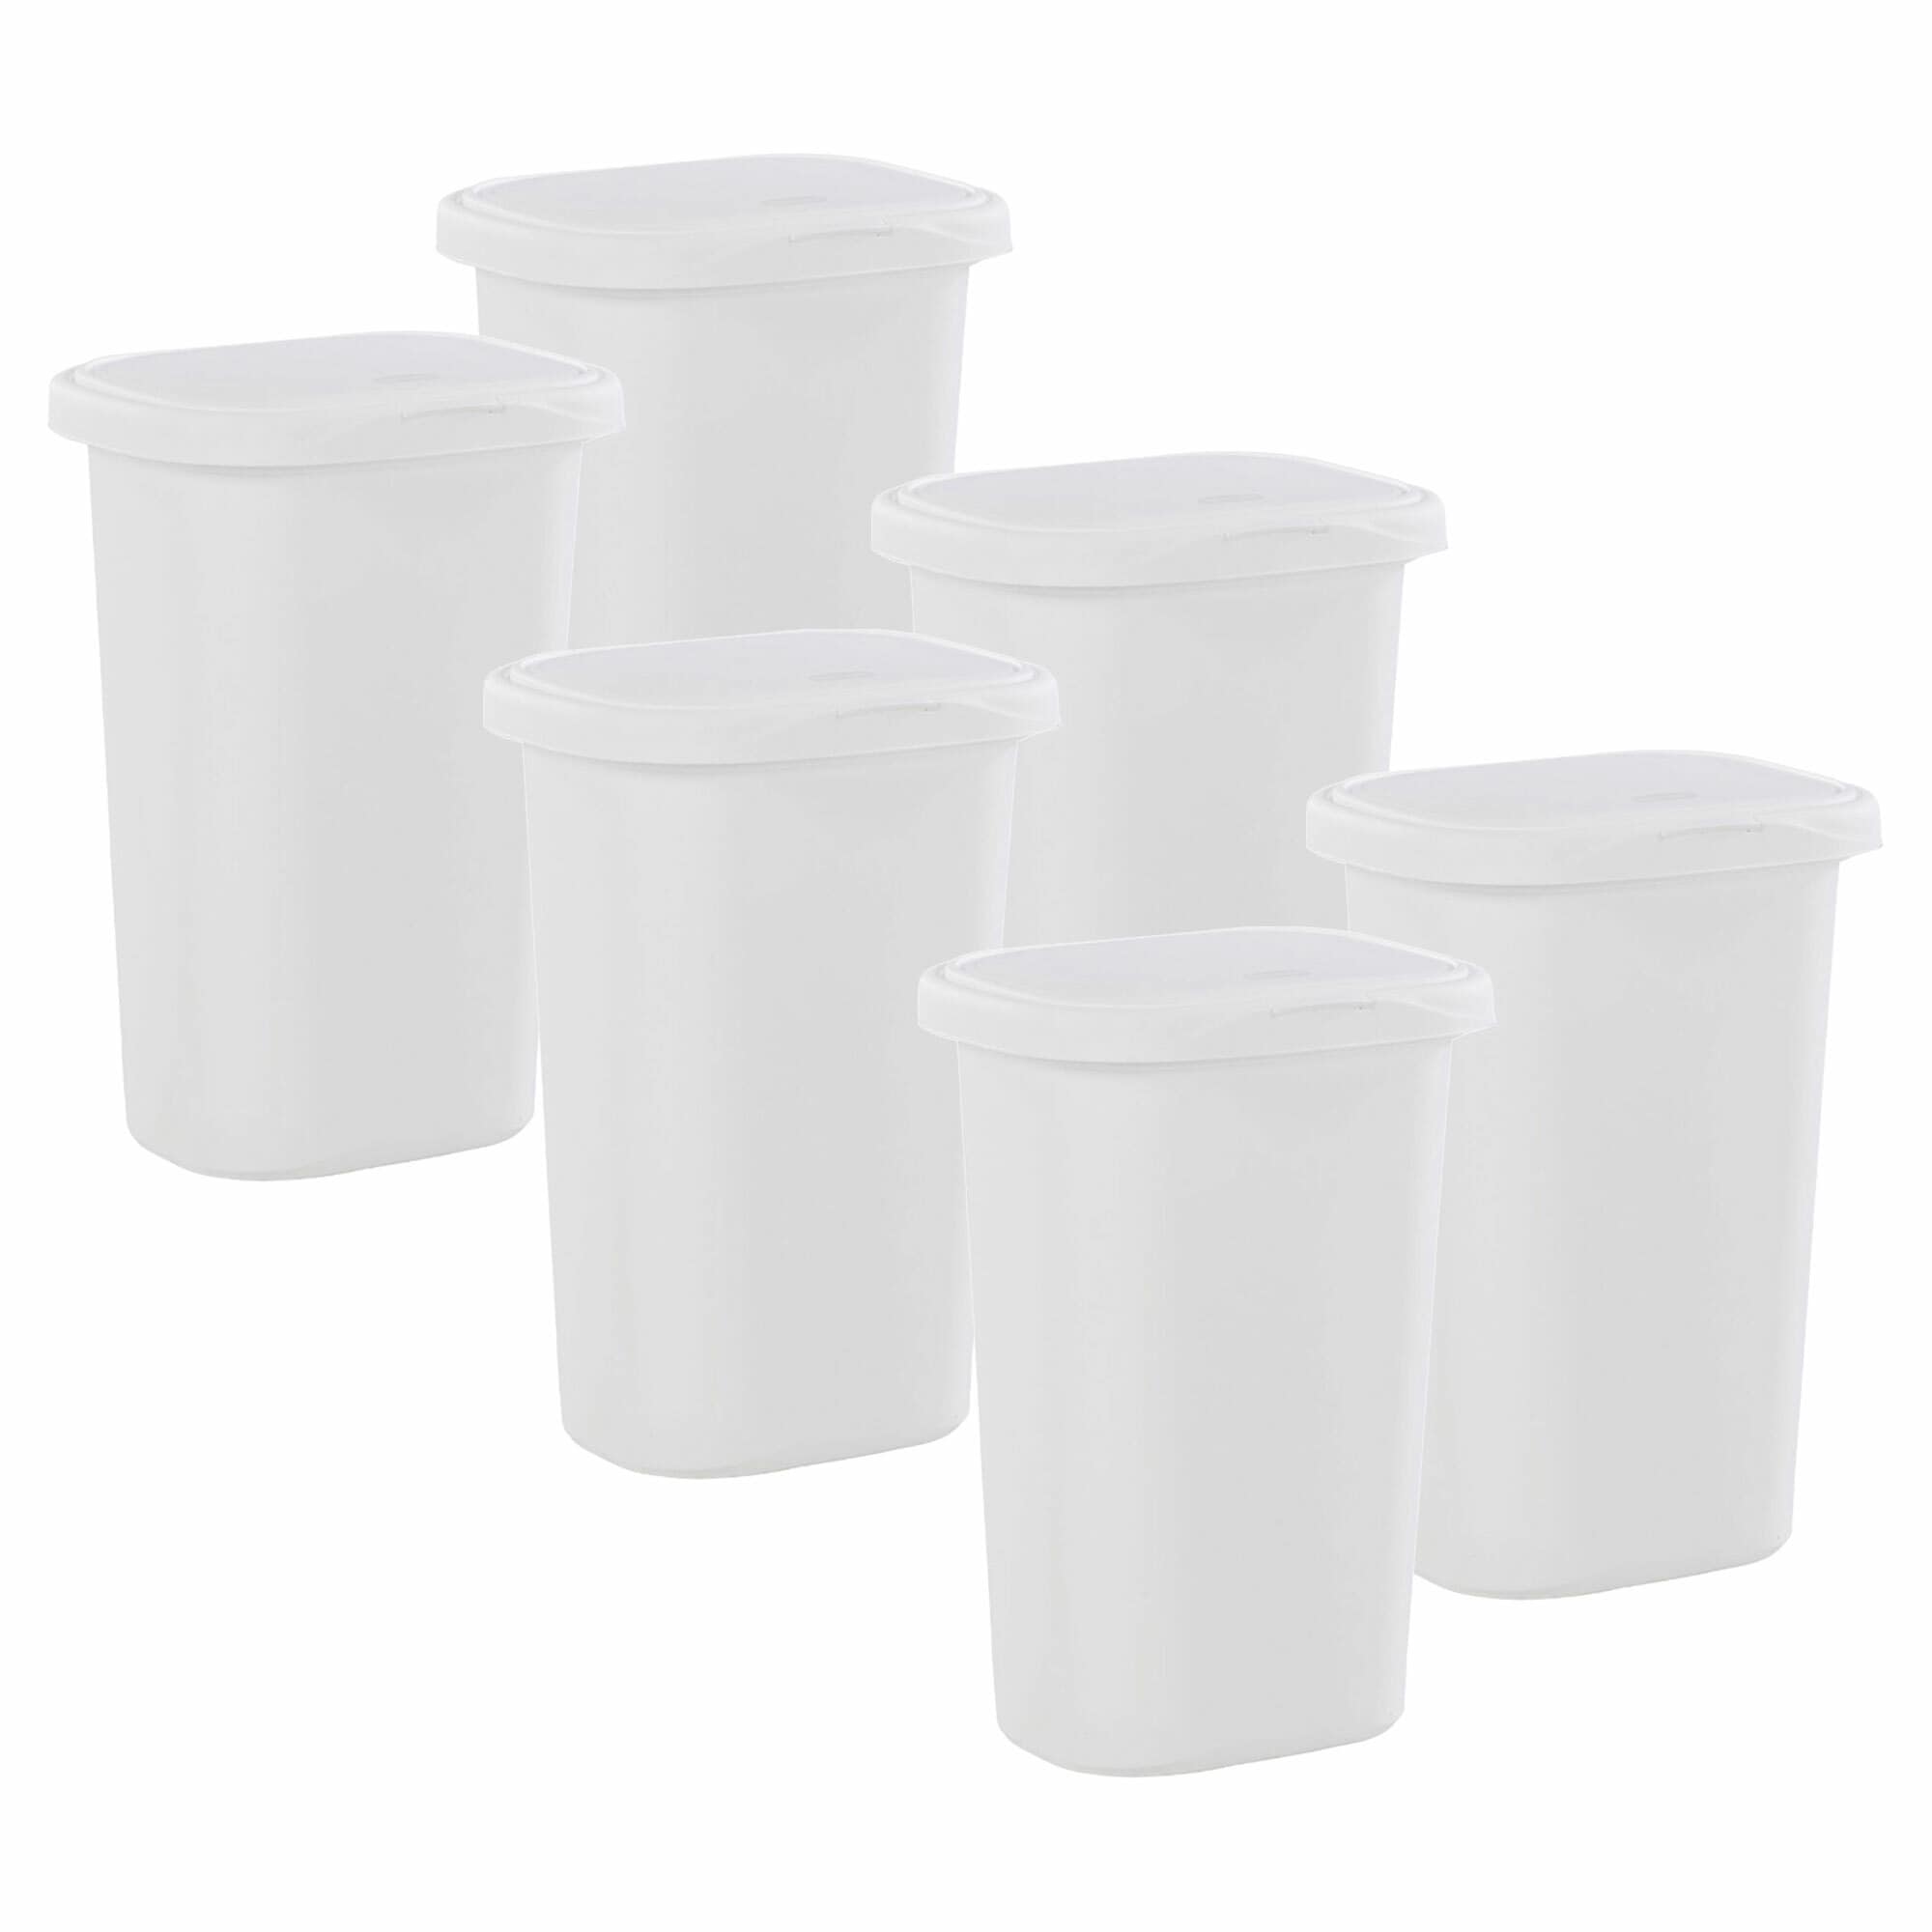 Rubbermaid 13.25 Gallon Rectangular Spring-Top Lid Kitchen Wastebasket  Trash Can for Tall Trashbags, White (4-Pack)